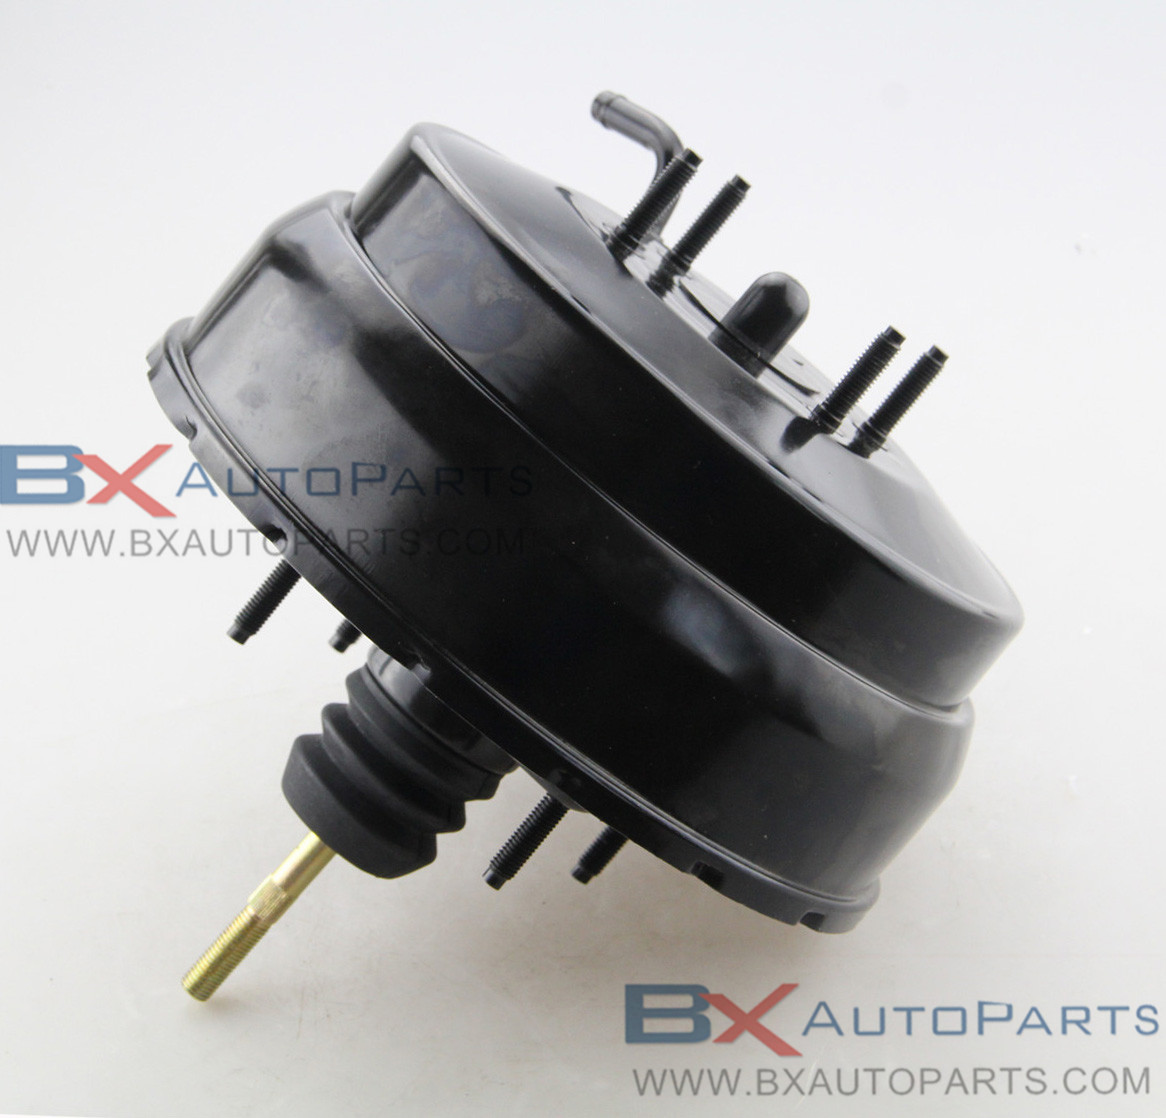 BRAKE BOOSTER FOR 44610-04050 44610-0W010 TOYOTA T100 RCK10 VCK11 21 RCB